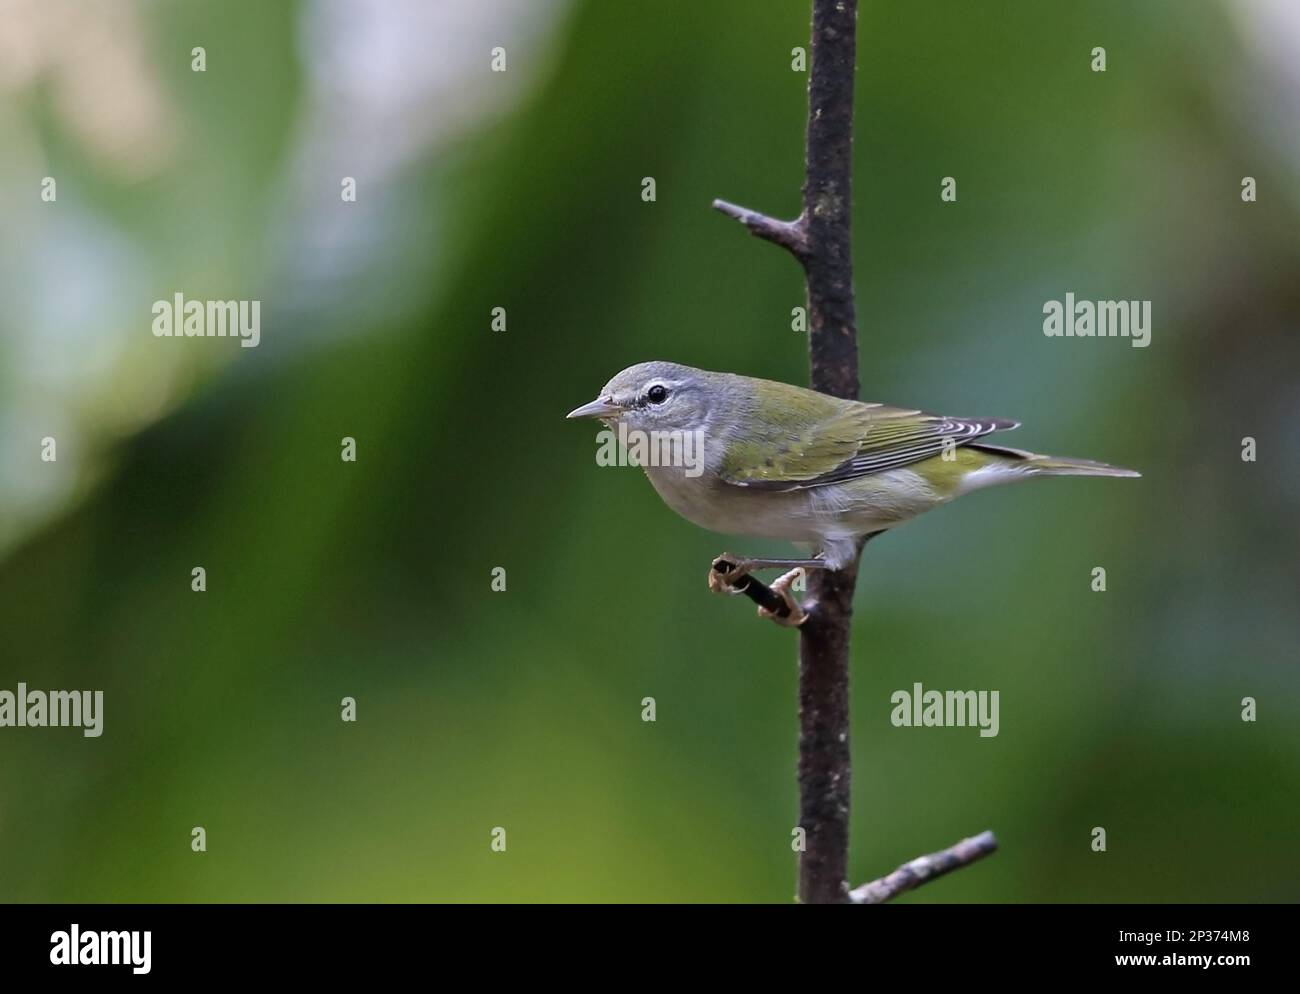 Tennessee Warbler (Vermivora peregrina) adult, perched on twig, Canopy Lodge, Panama Stock Photo